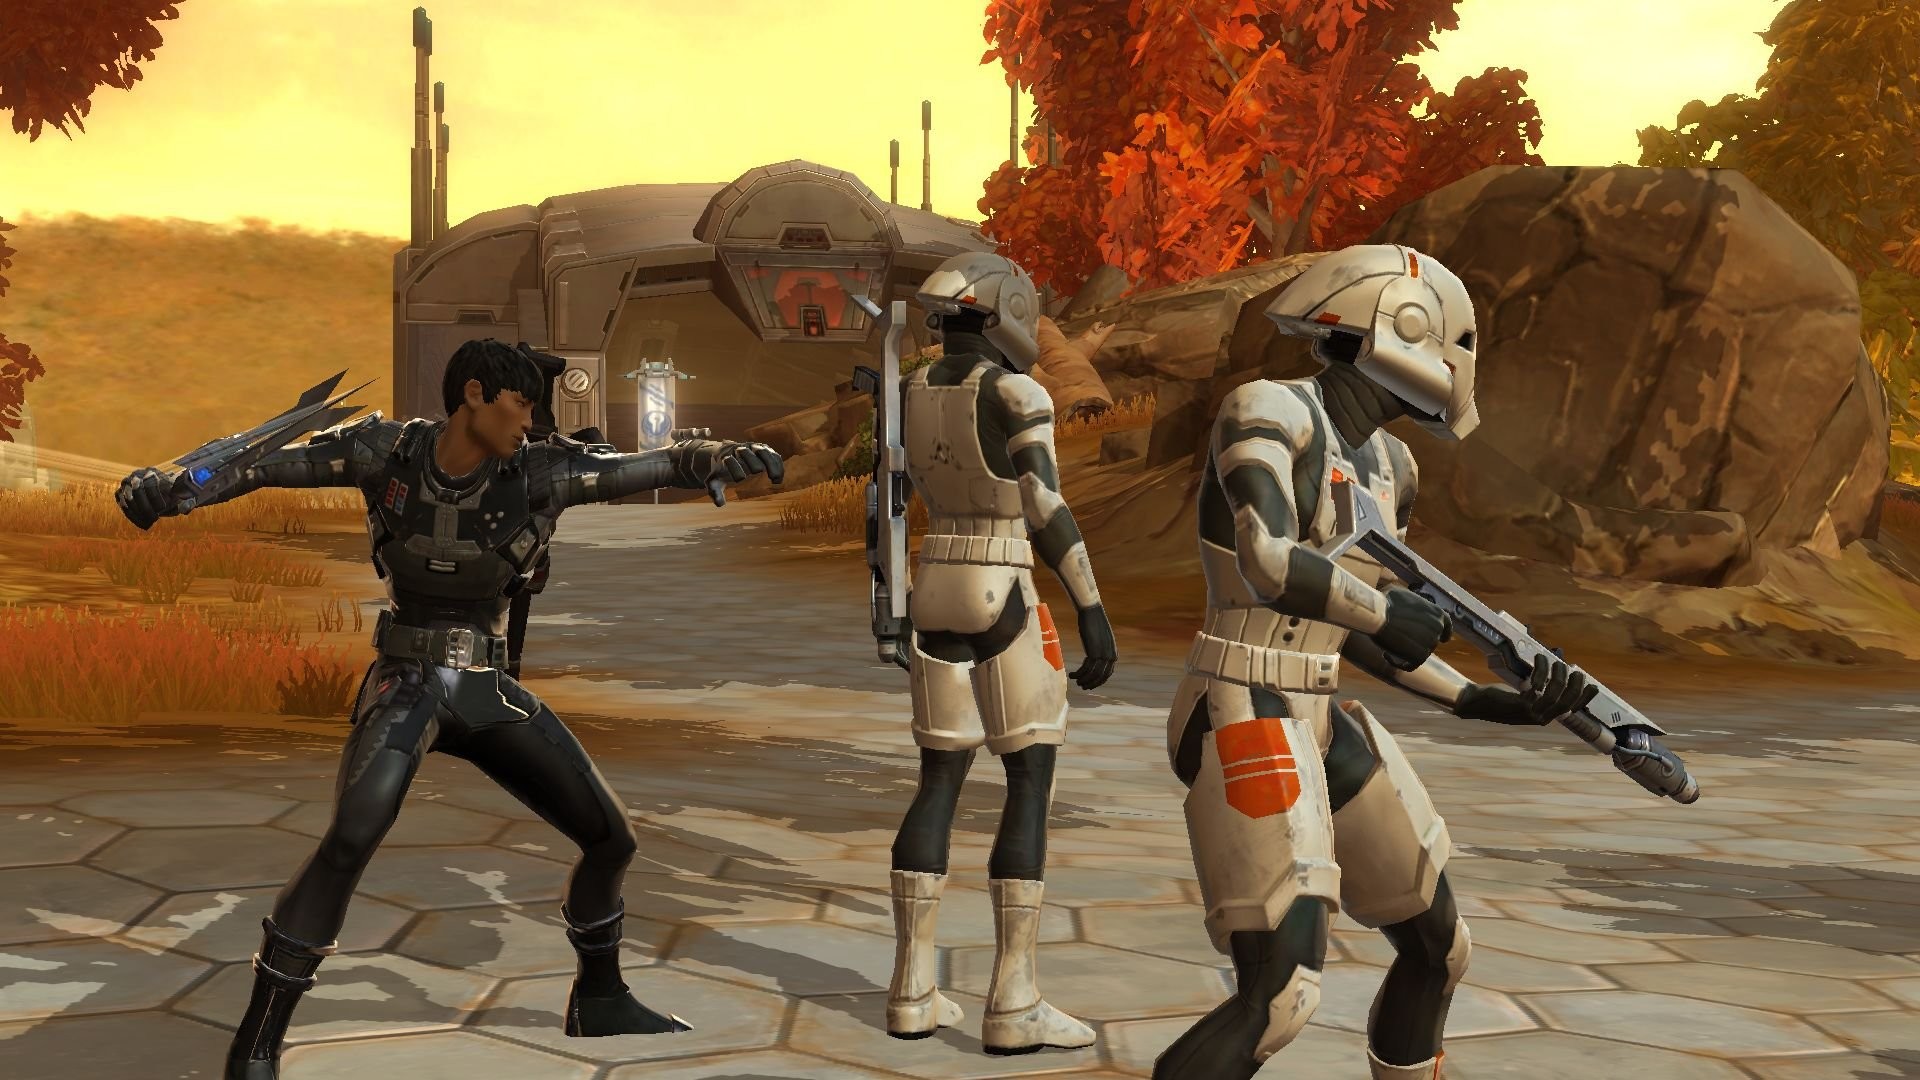 1920x1080 STAR WARS OLD REPUBLIC mmo rpg swtor fighting sci-fi wallpaper |   | 518922 | WallpaperUP